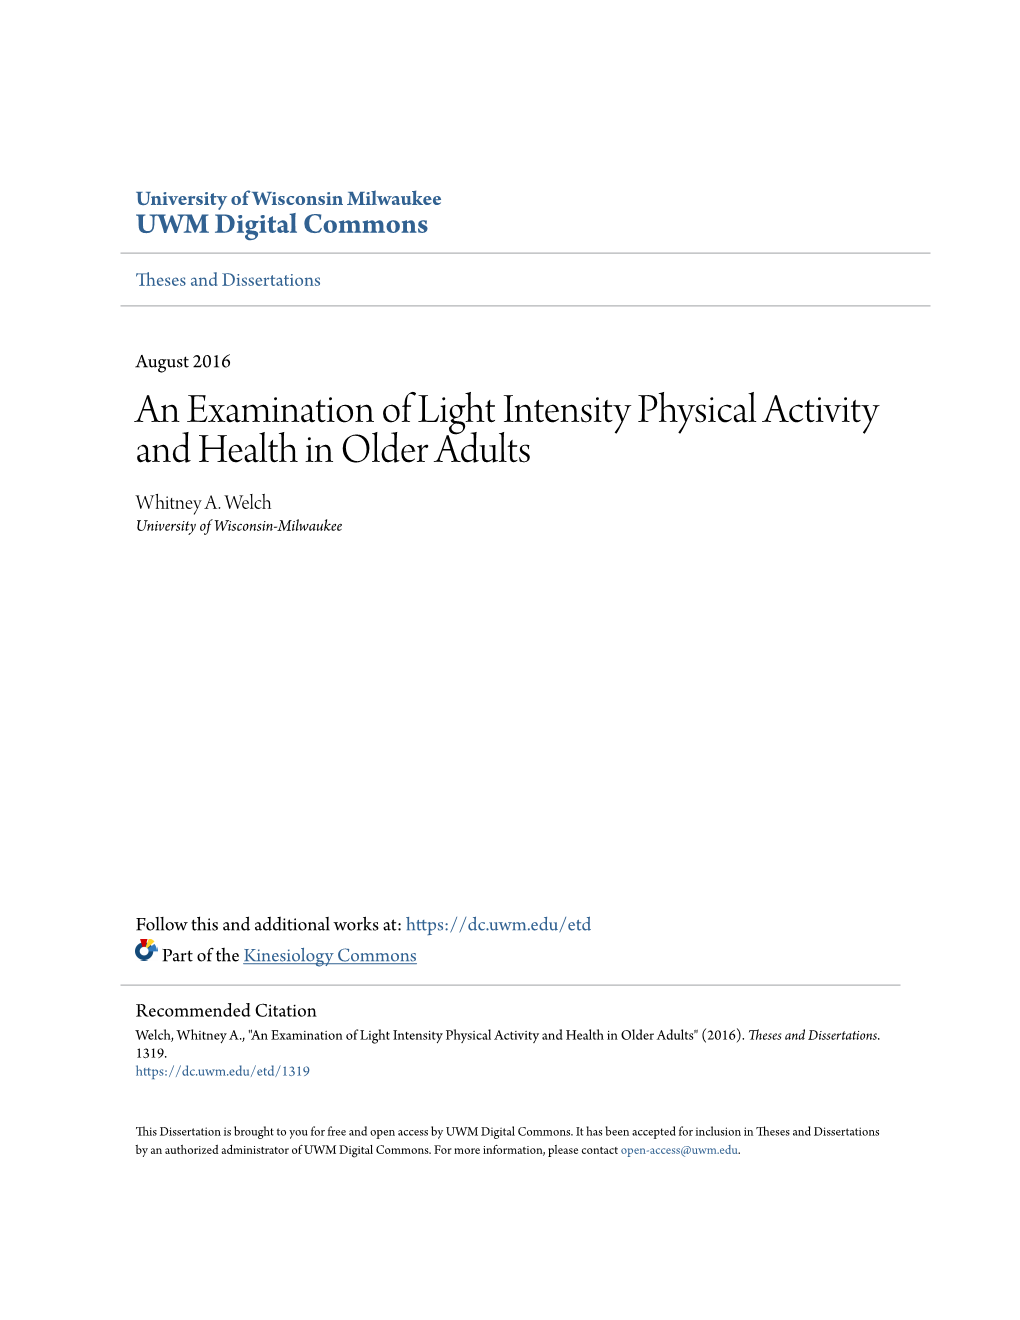 An Examination of Light Intensity Physical Activity and Health in Older Adults Whitney A